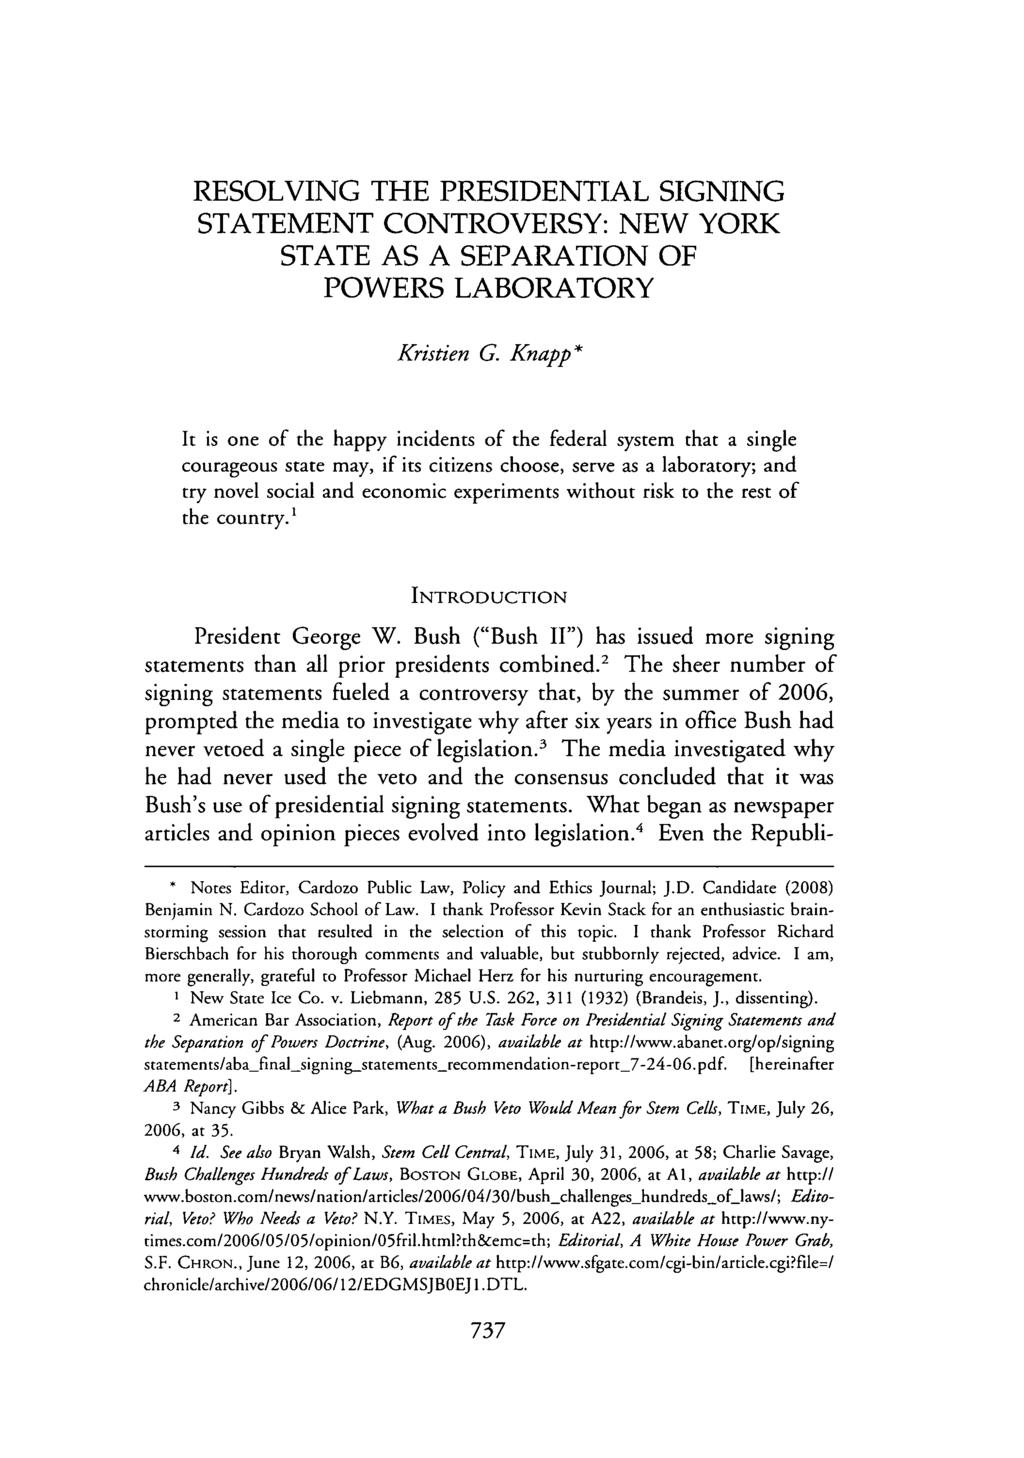 RESOLVING THE PRESIDENTIAL SIGNING STATEMENT CONTROVERSY: NEW YORK STATE AS A SEPARATION OF POWERS LABORATORY Kristien G.